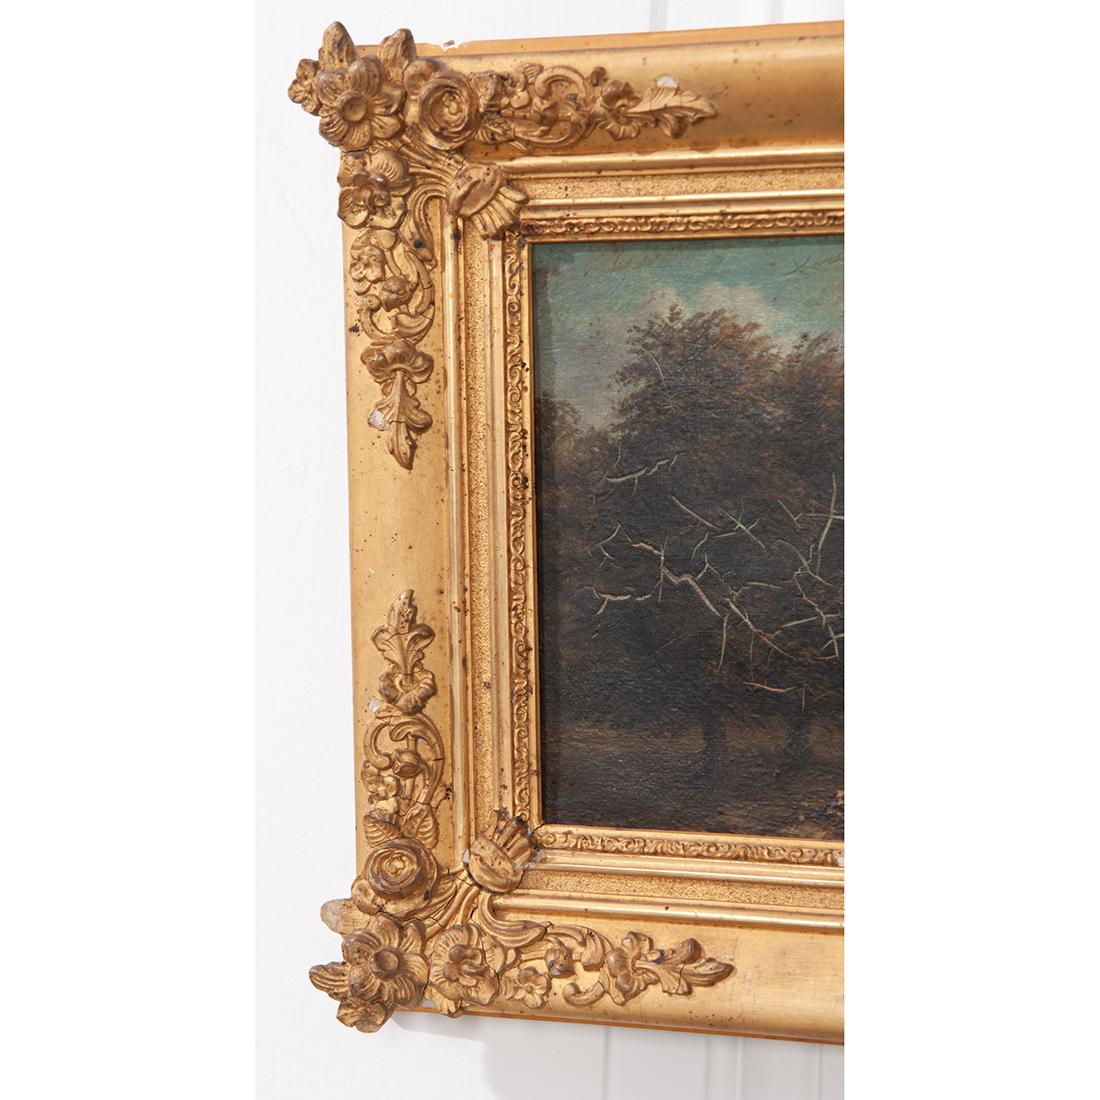 French oil painting on canvas of a cattle grazing surrounded by a distressed and decorative plaster, gilt frame. It is addressed on the back of the canvas ‘A mon ami A. LeClerc’ (To my friend LaClerc), signed and dated.